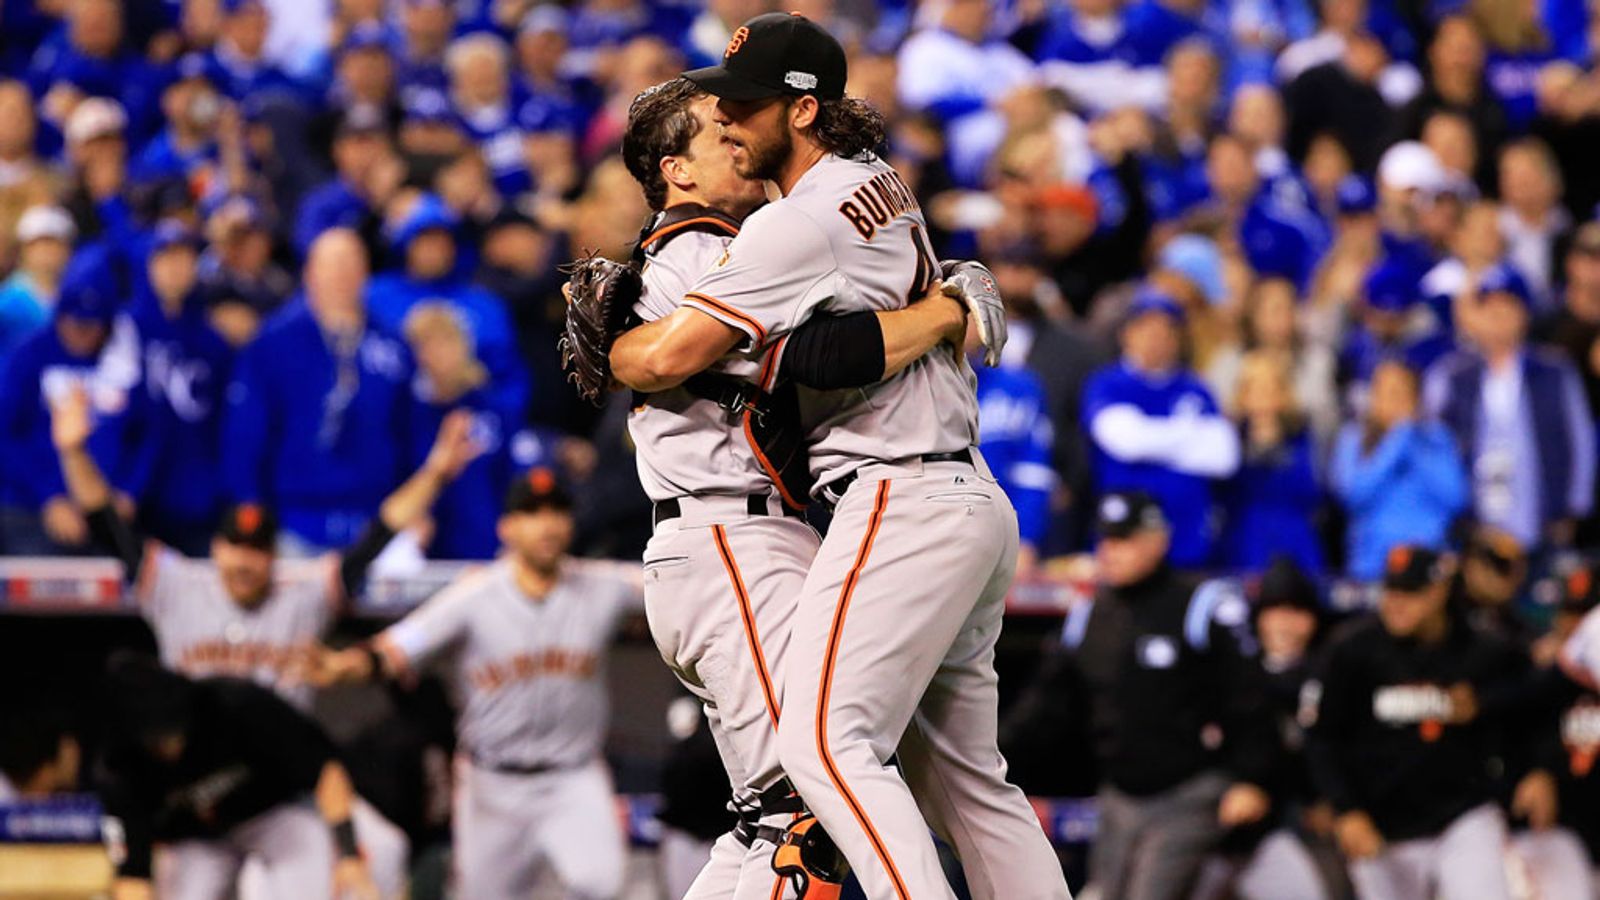 San Francisco Giants win World Series title after tense triumph over